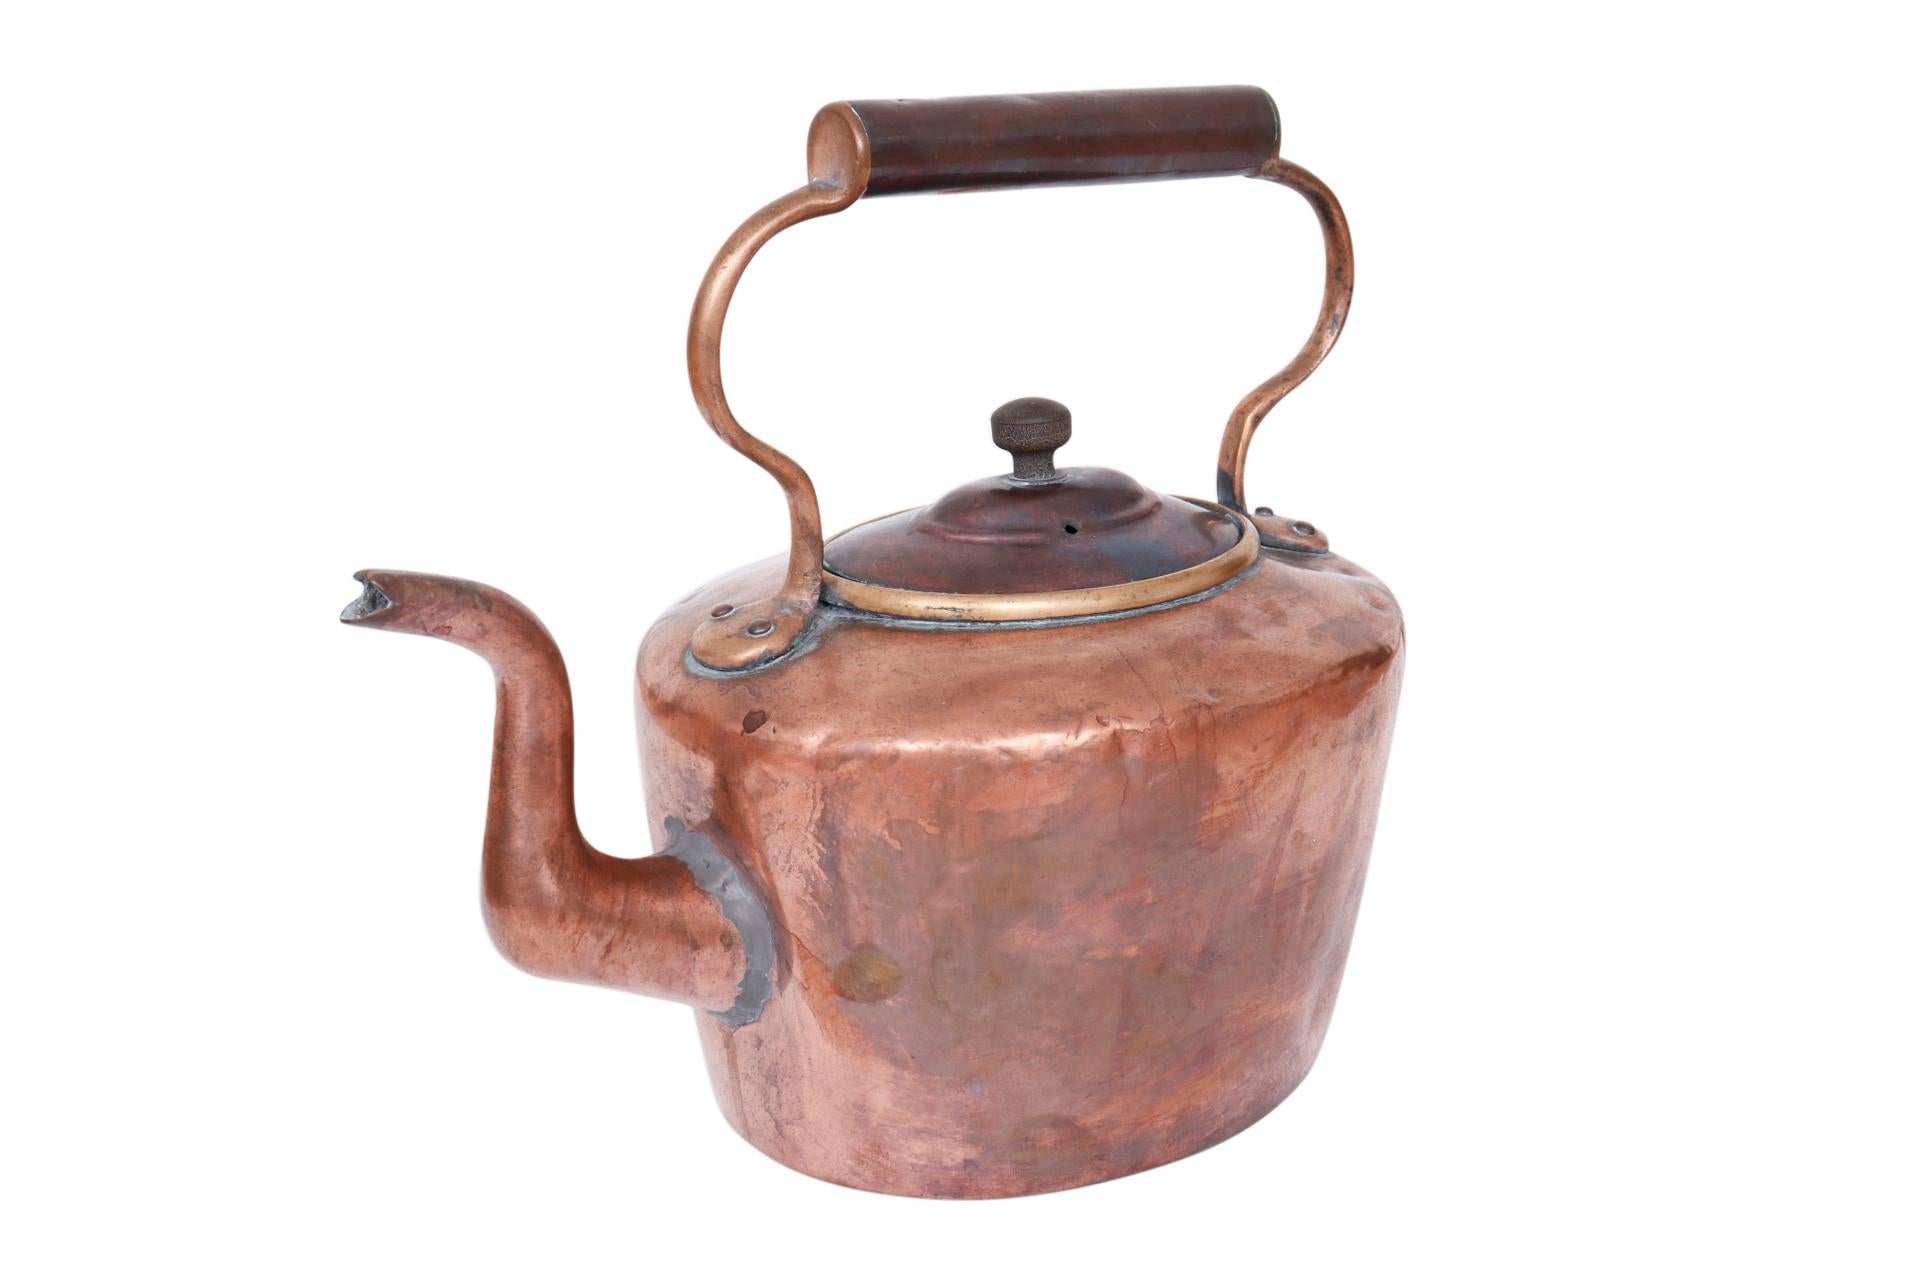 A copper plated brass kettle with bronze lid. The kettle lifts with a copper handle with a bronze handhold. Some copper patina and wear revealing brass can be seen at the joins.